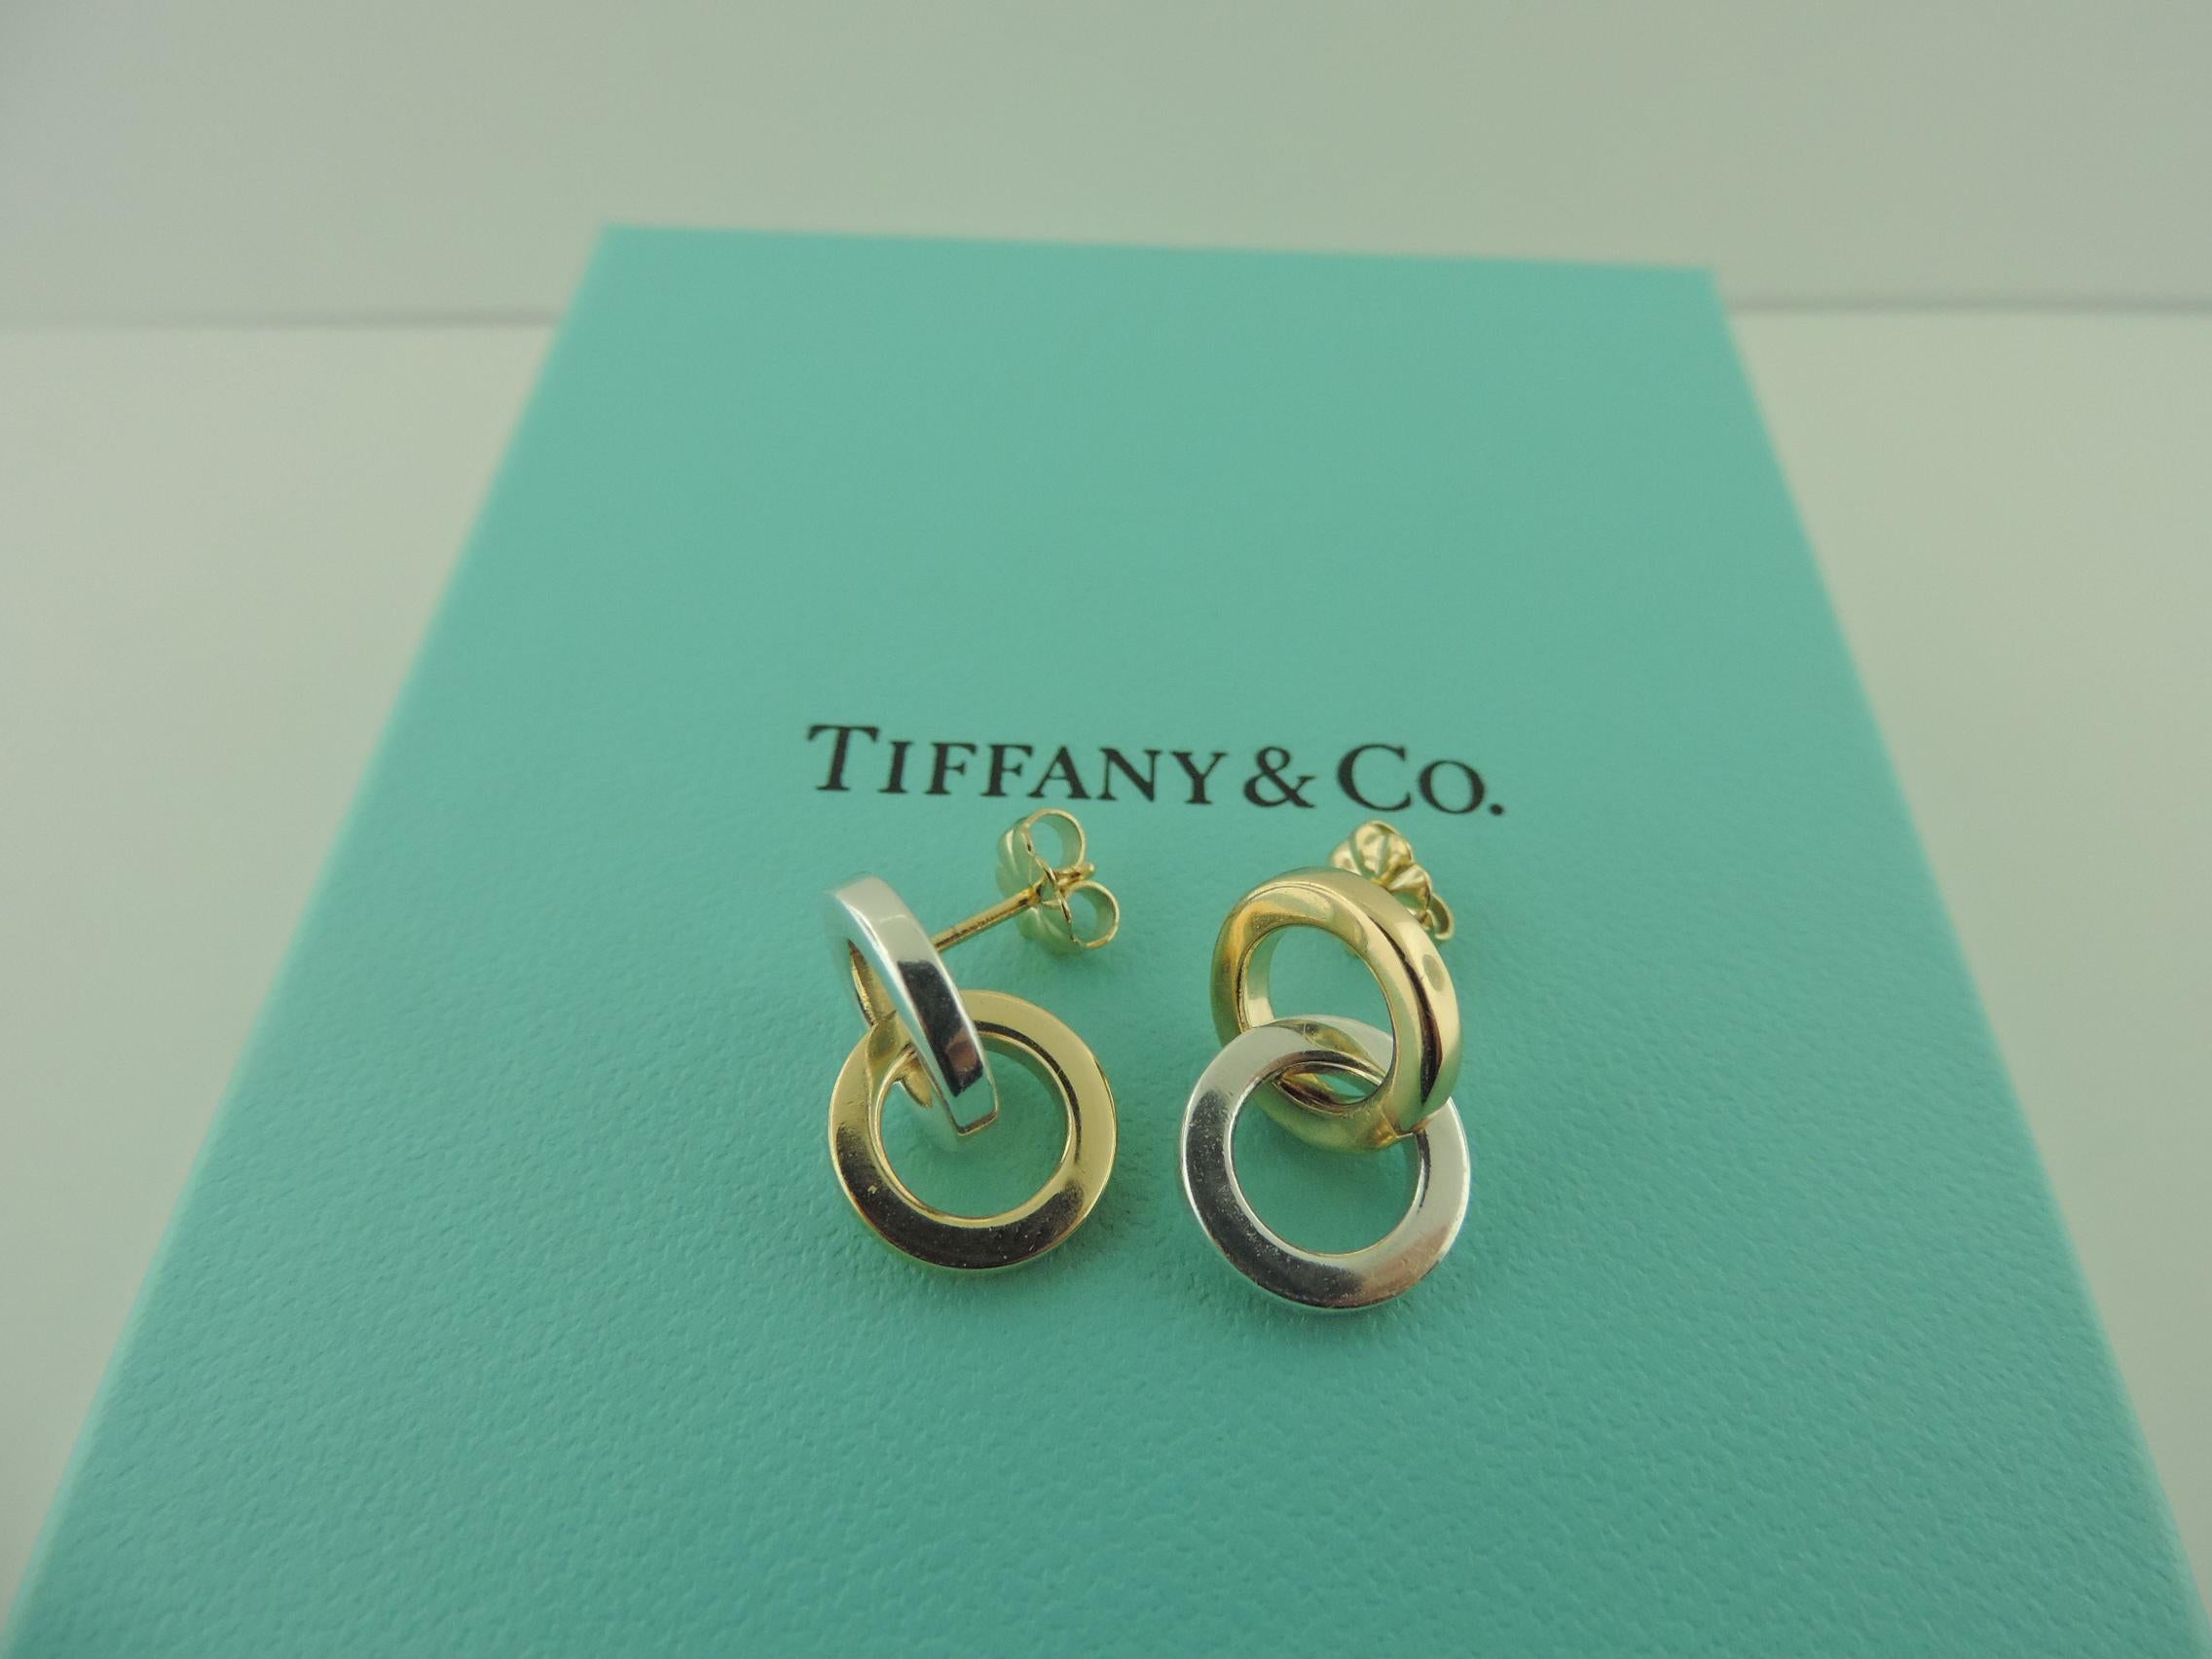 18K Yellow Gold & Sterling Silver

27mm x 17mm

4.3 DWT

6.4 Grams

Earrings come with Blue Tiffany & Co. box (As shown in photo)

Recently polished